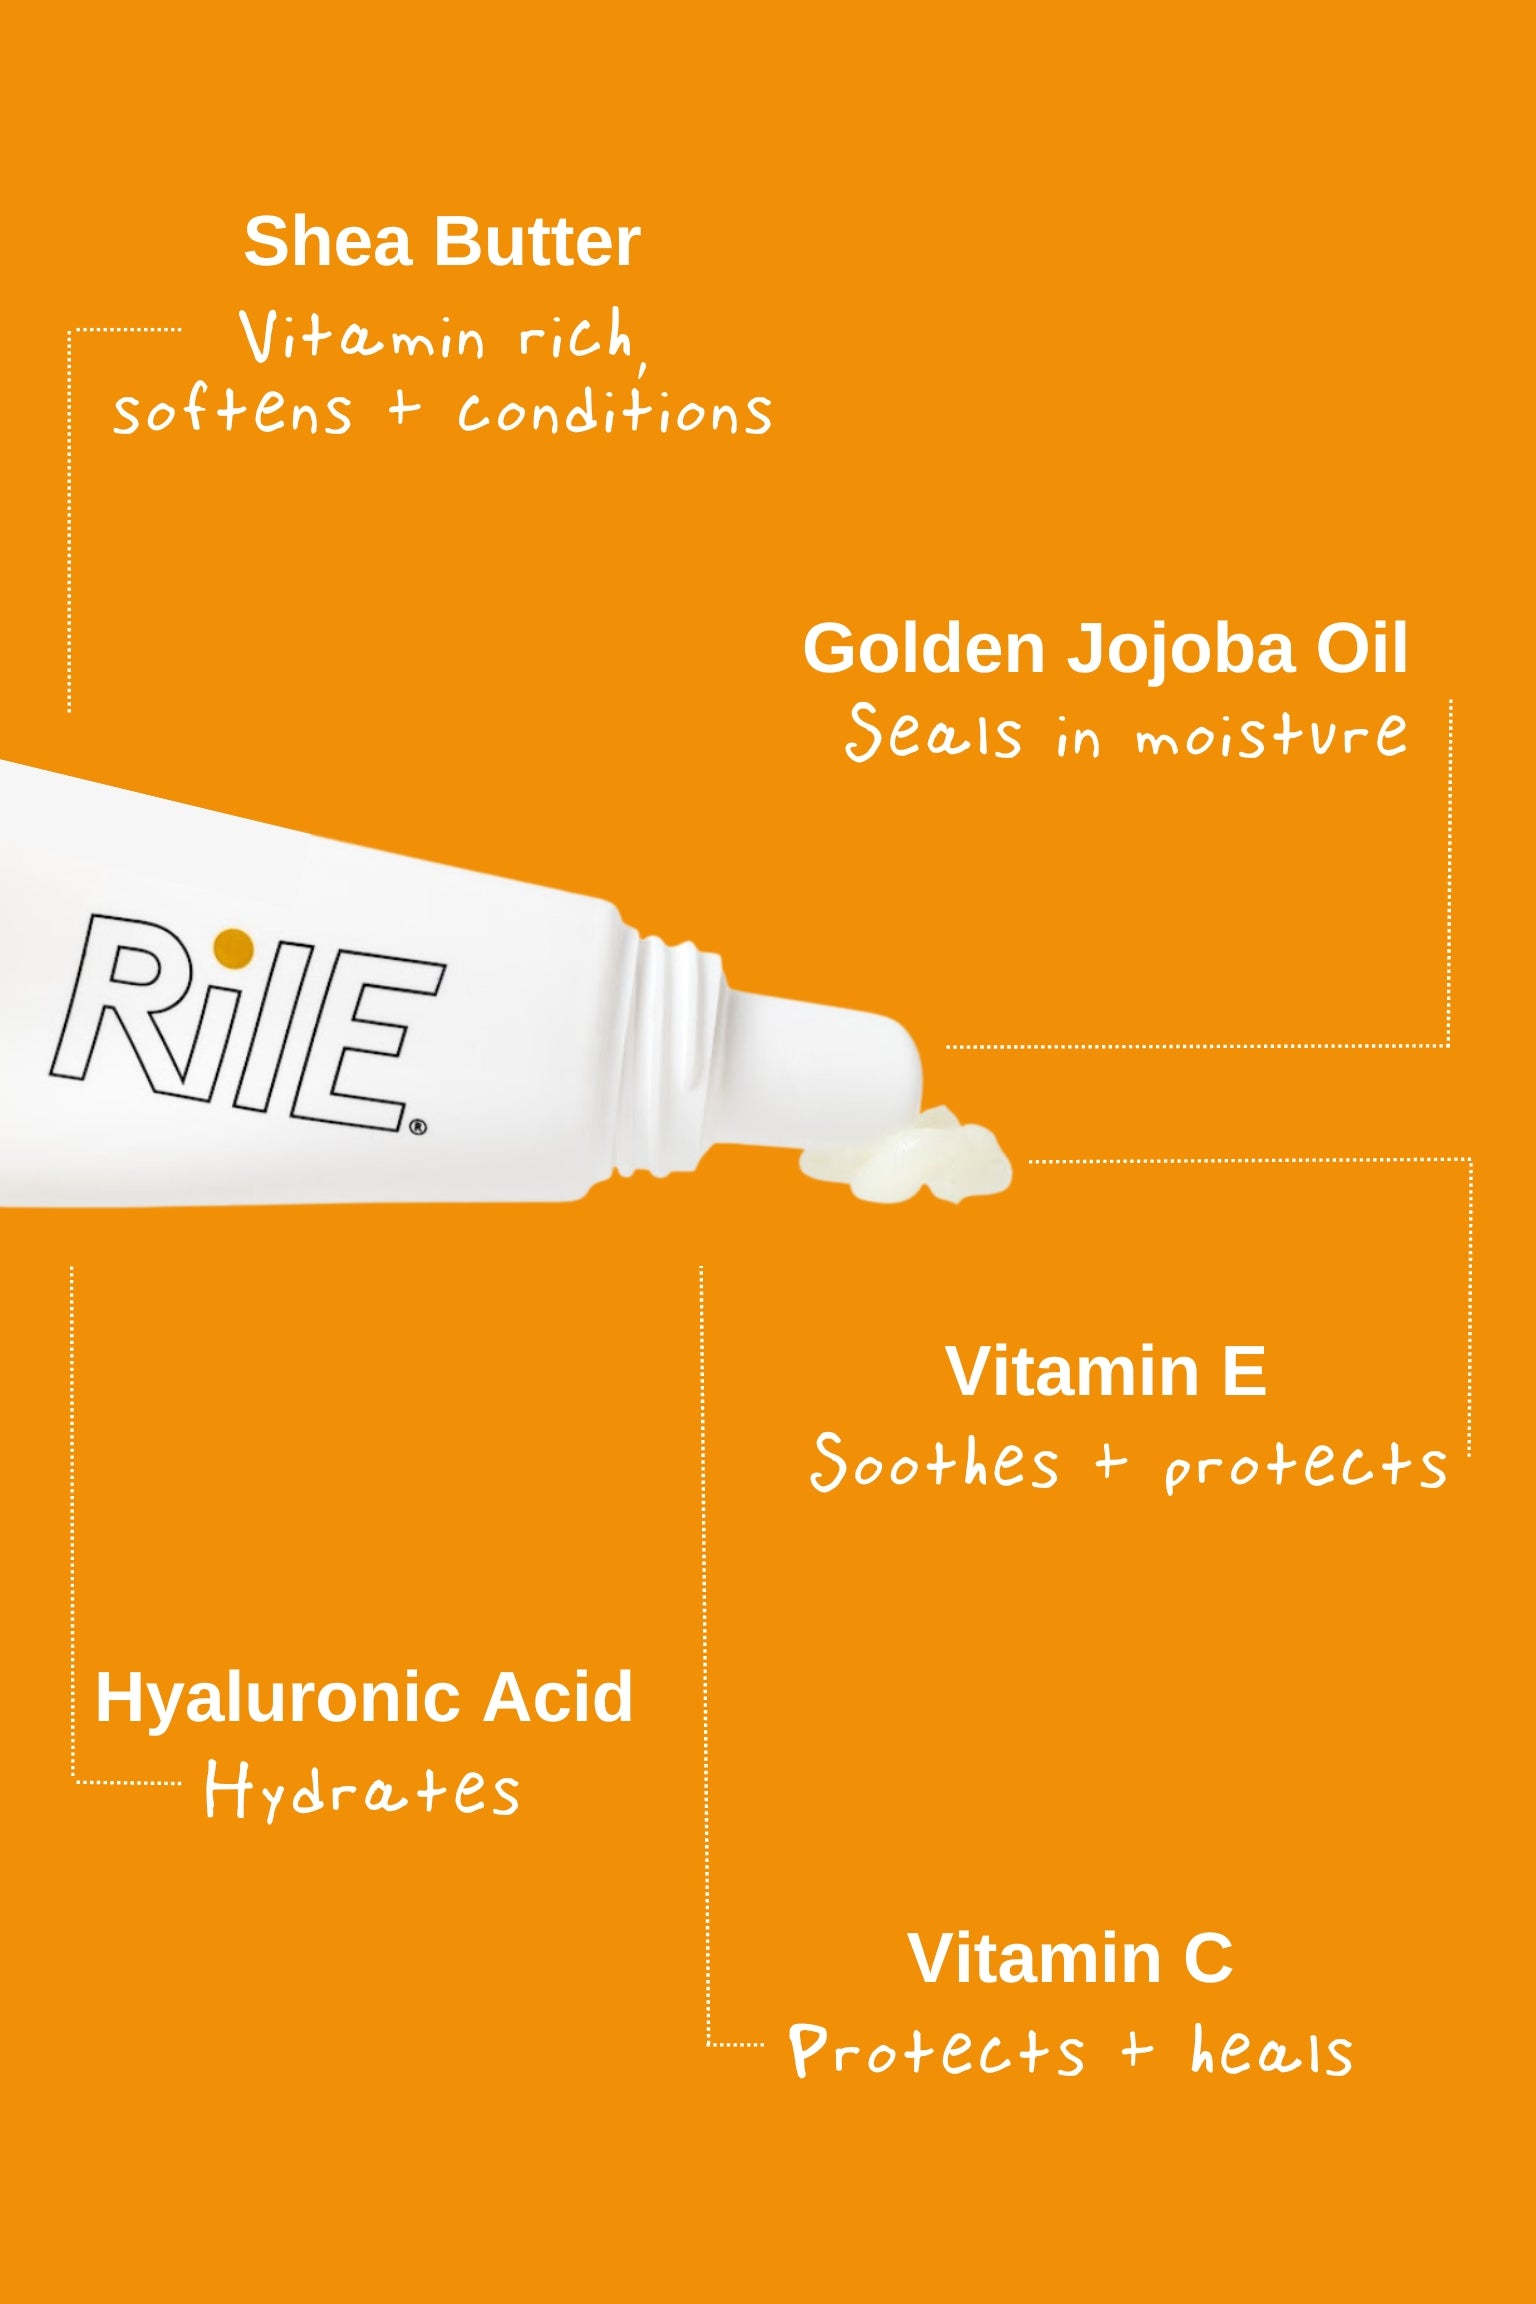 The white Rile tube showing some of the lip balm. The ingredients Shea butter, golden jojoba oil, vitamin e, hyaluronic acid and vitamin c are highlighted and how they soothe, protect and soften lips.